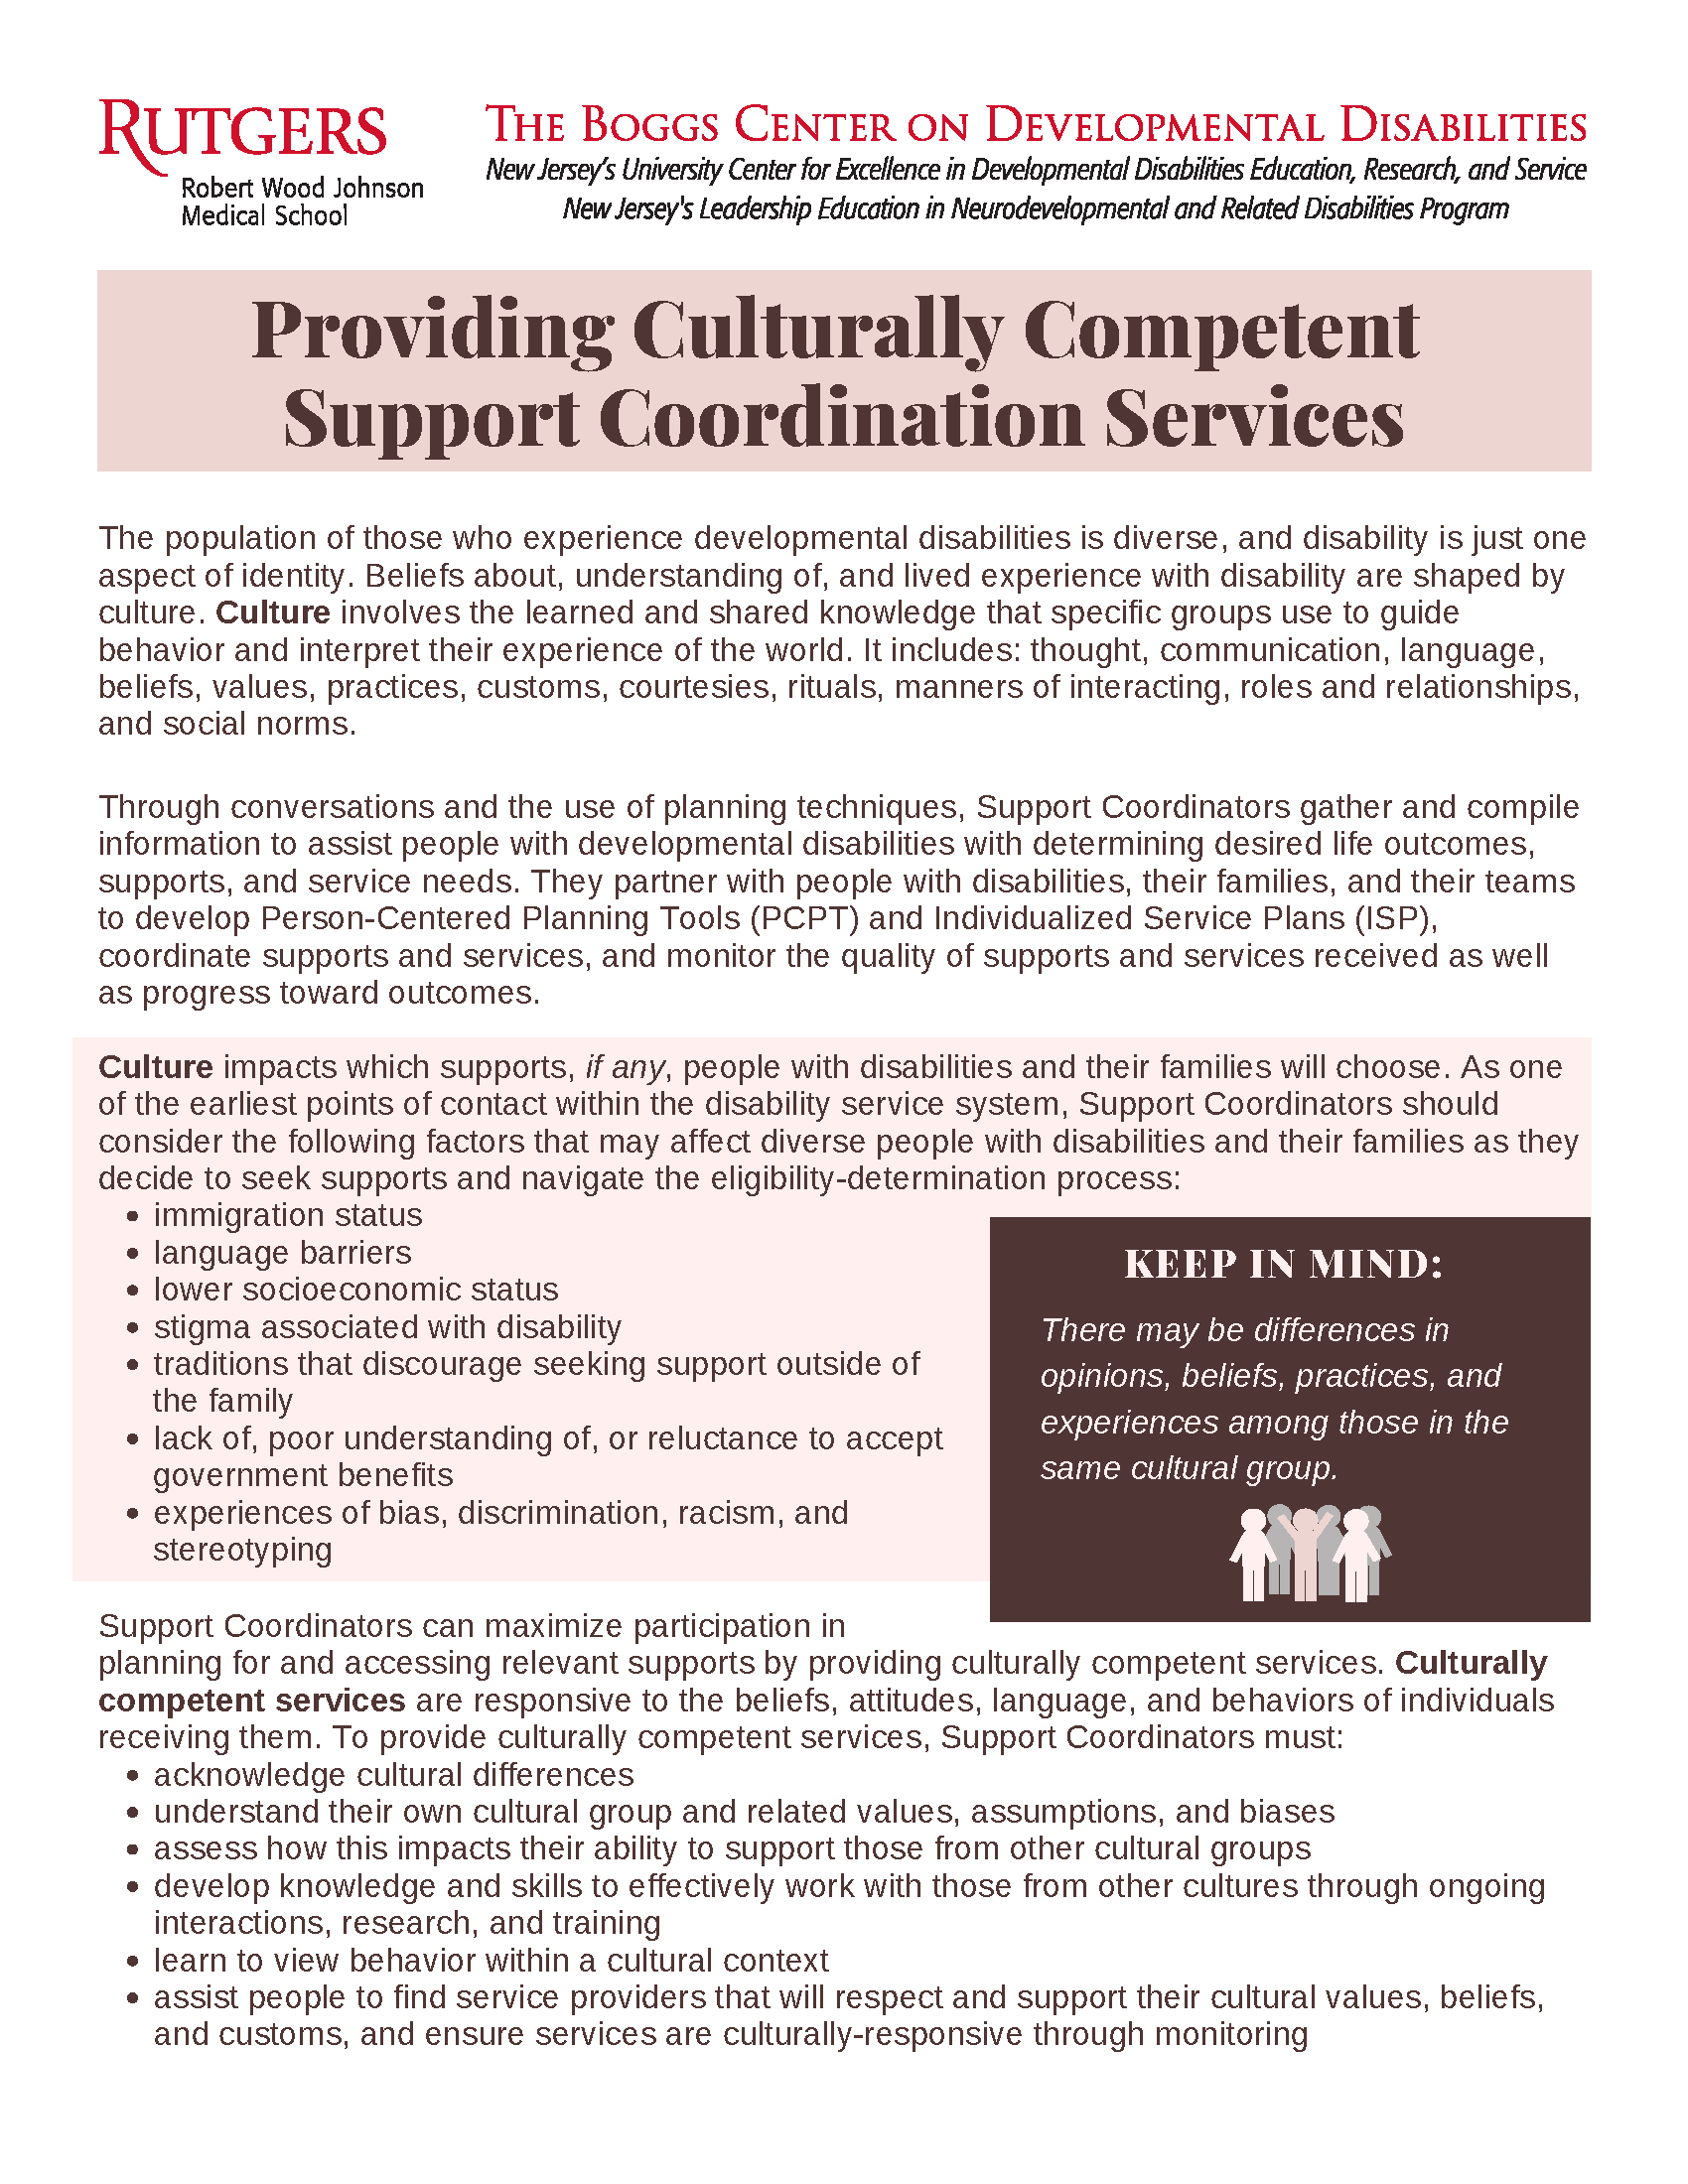 culturally competent services cover